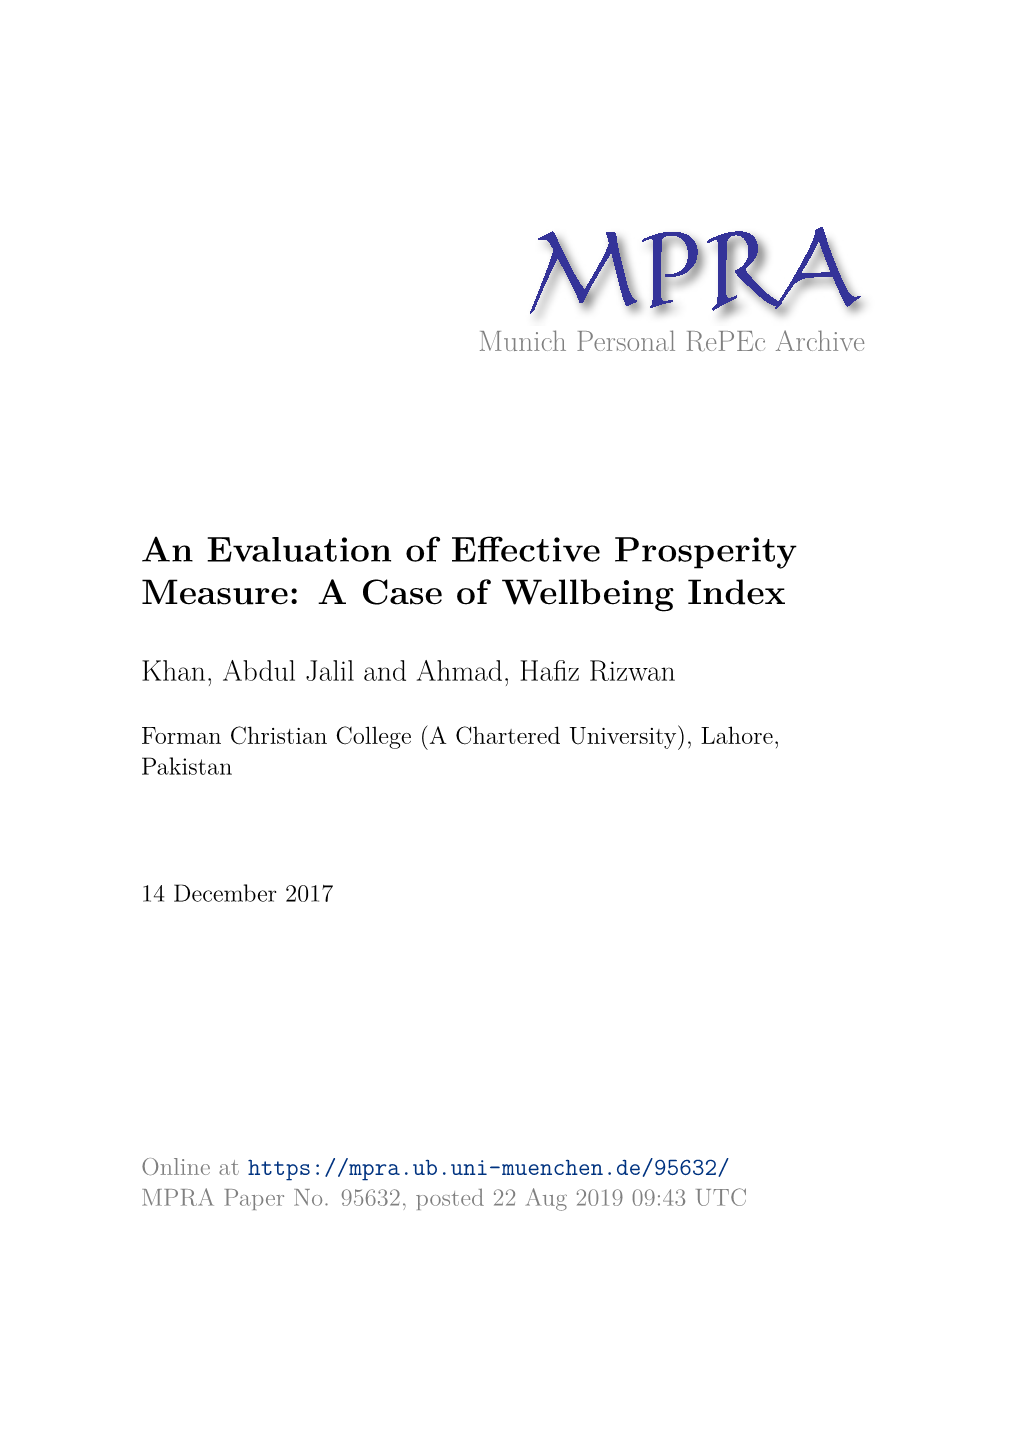 An Evaluation of Effective Prosperity Measure: a Case of Wellbeing Index